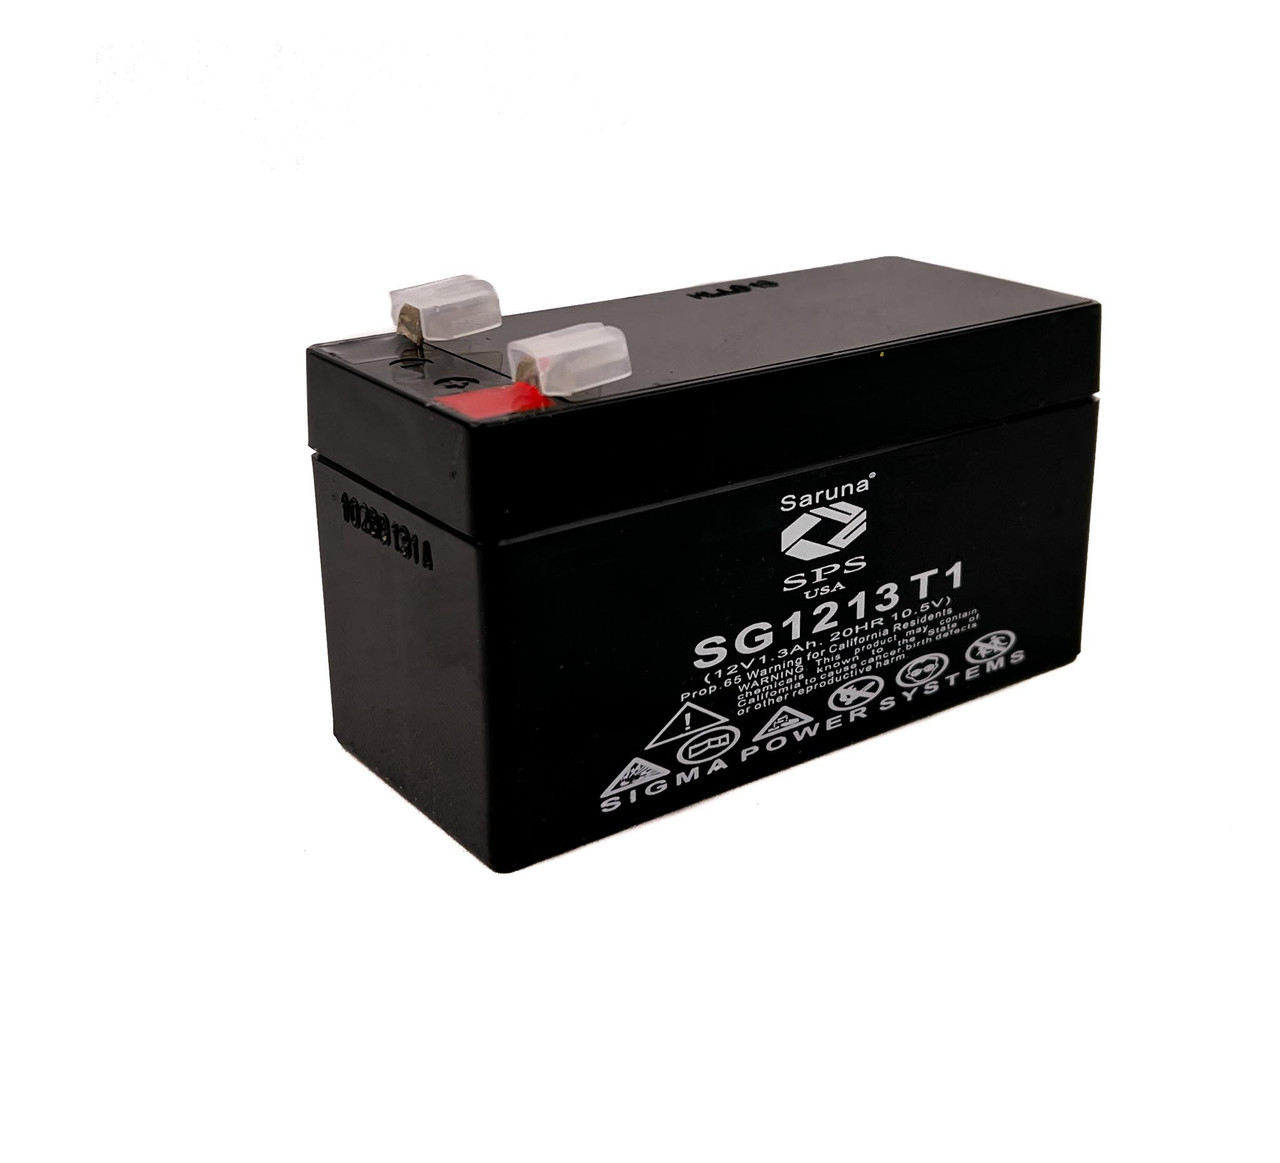 Raion Power 12V 1.3Ah Non-Spillable Replacement Rechargebale Battery for Marquette 900 Responder Defibrillator